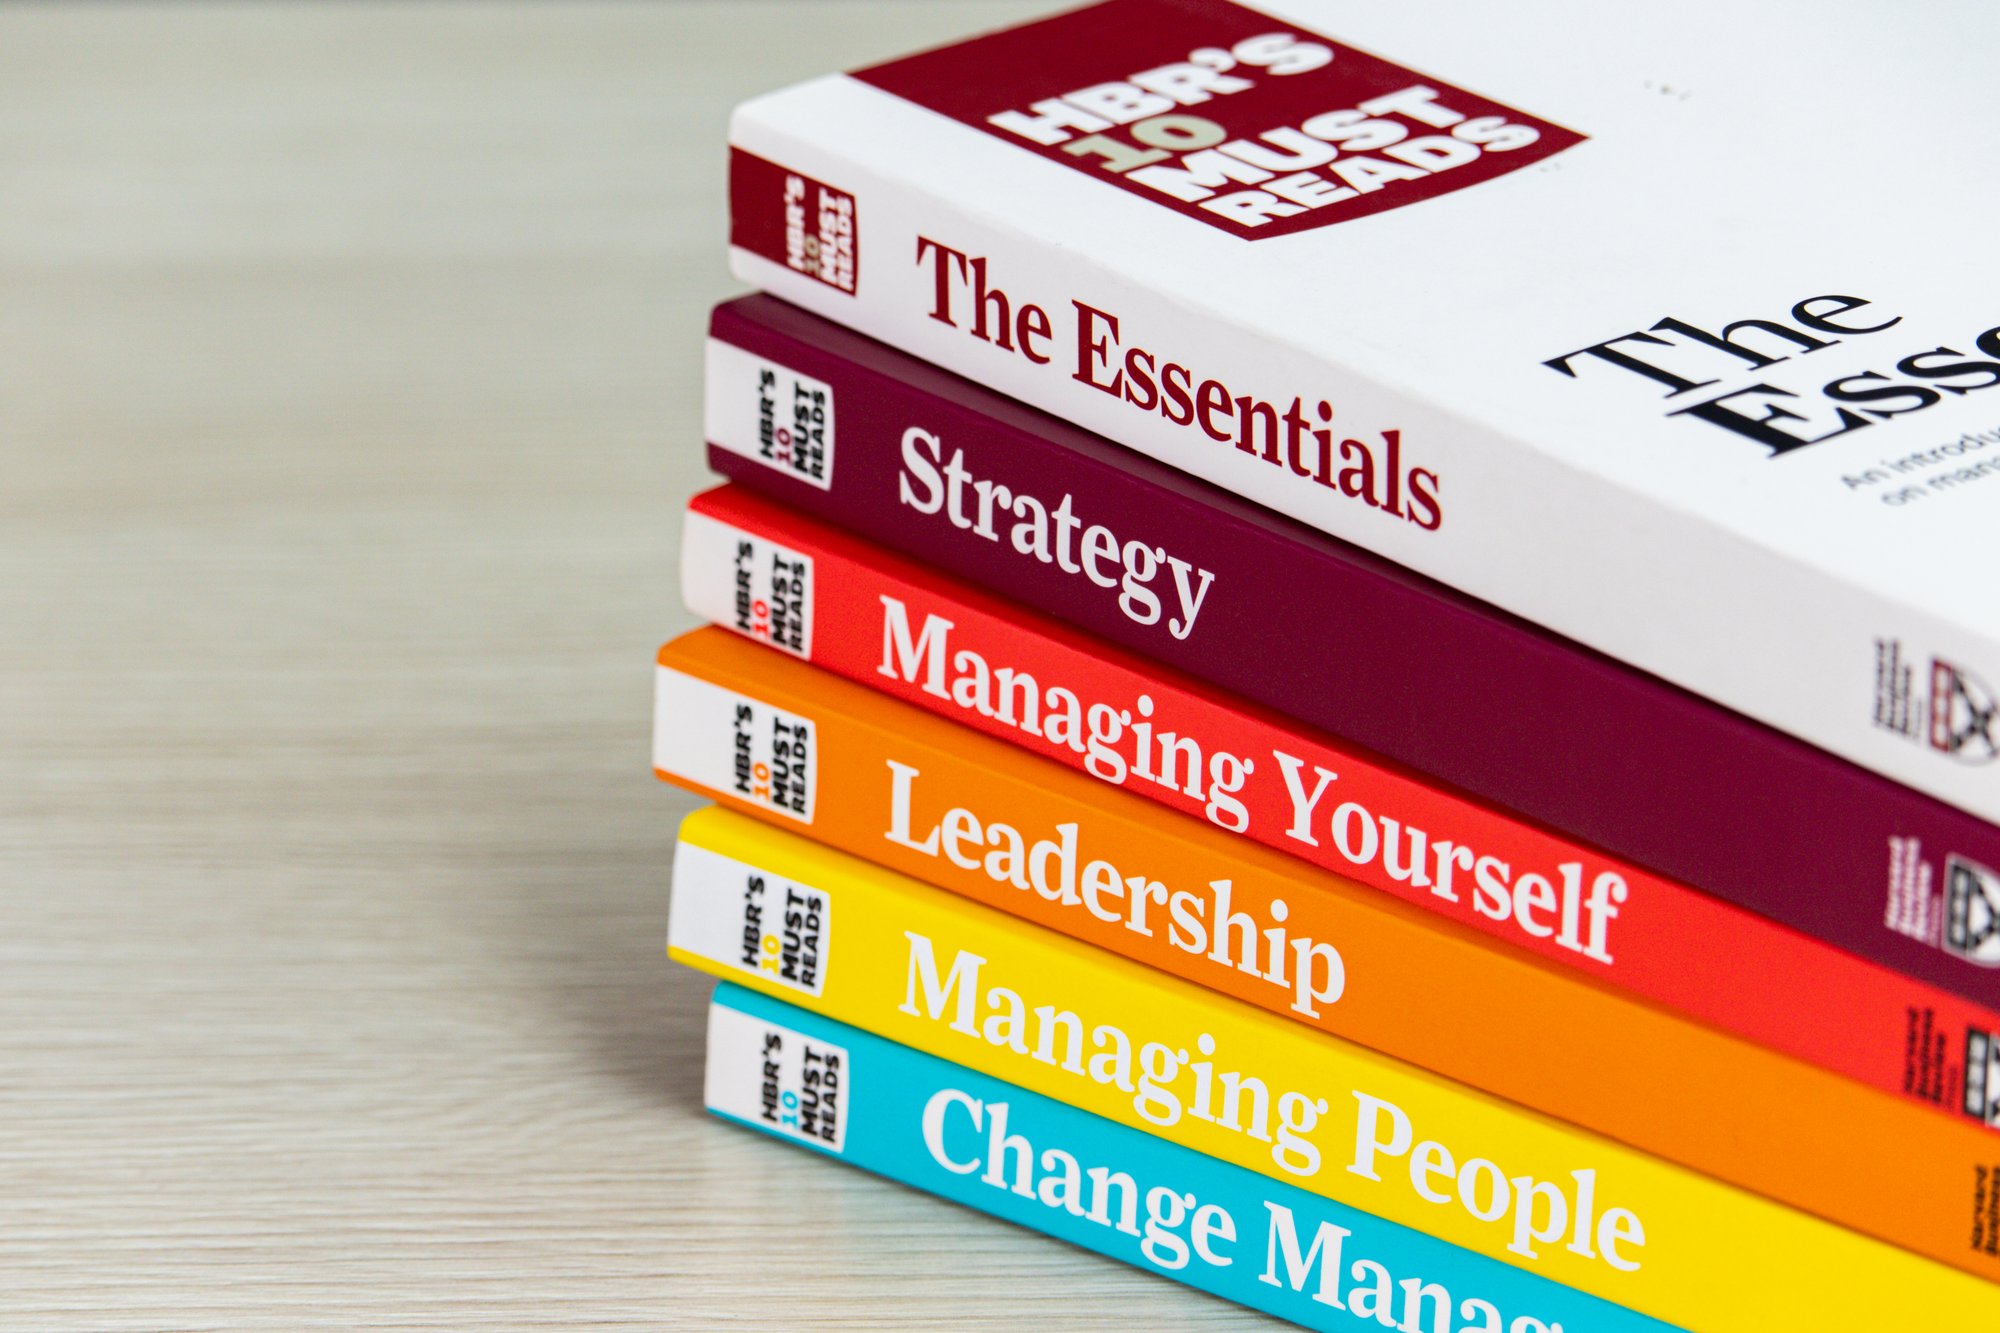 A collection of HBR Books